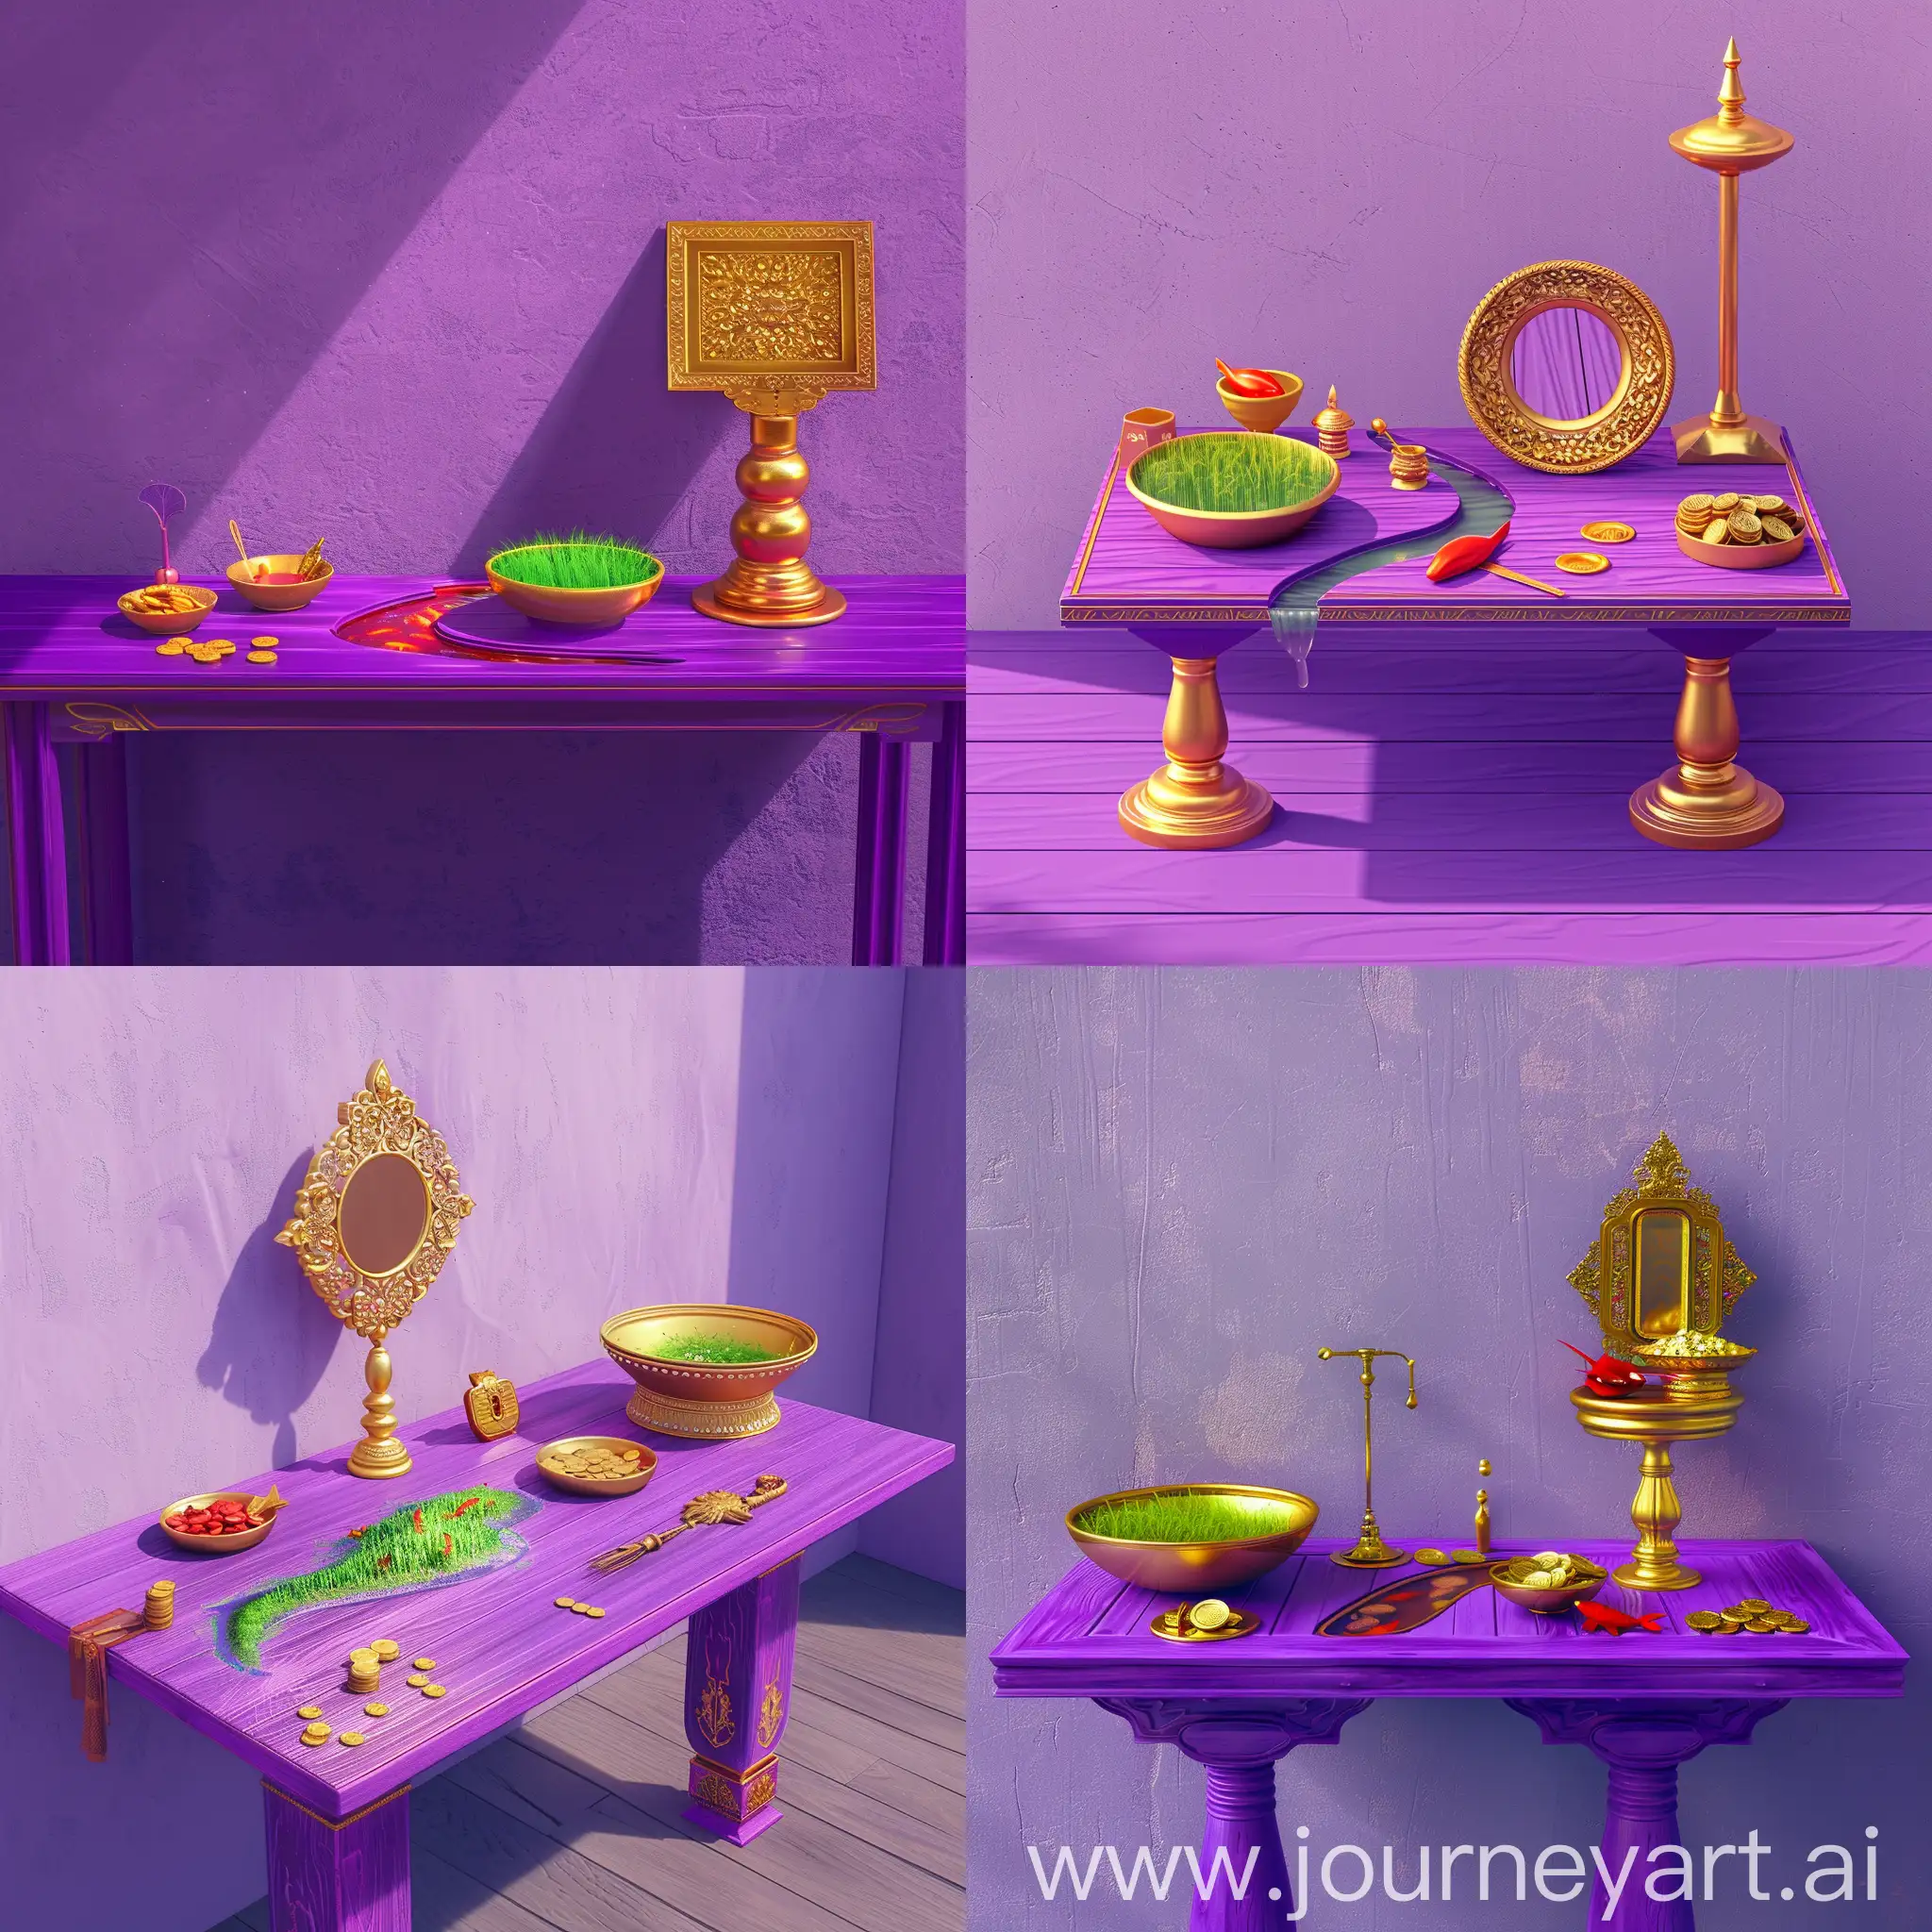 Vibrant-Wooden-Table-with-Golden-Bowls-and-Mirror